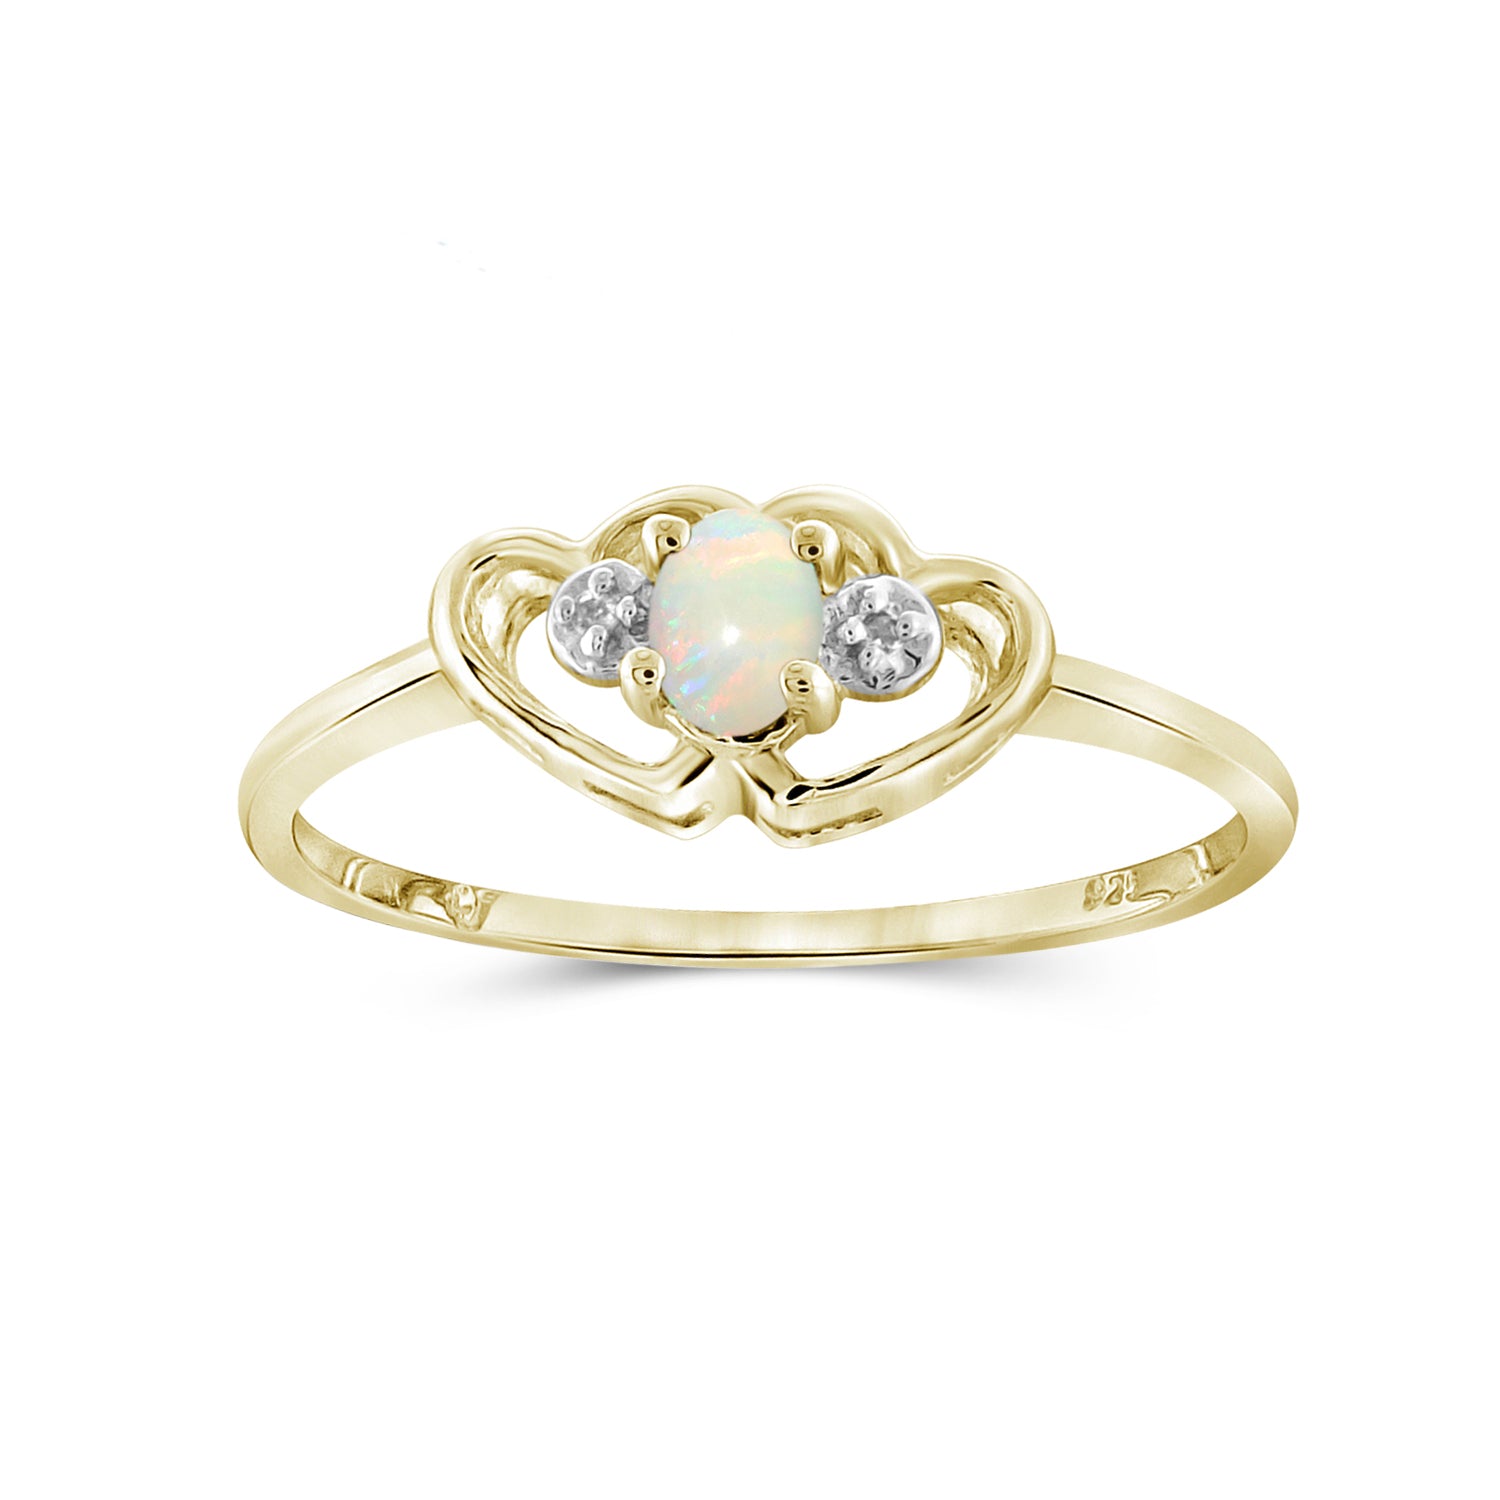 0.10 Carat T.G.W. Opal Gemstone and White Diamond Accent 14K Gold-plated Ring